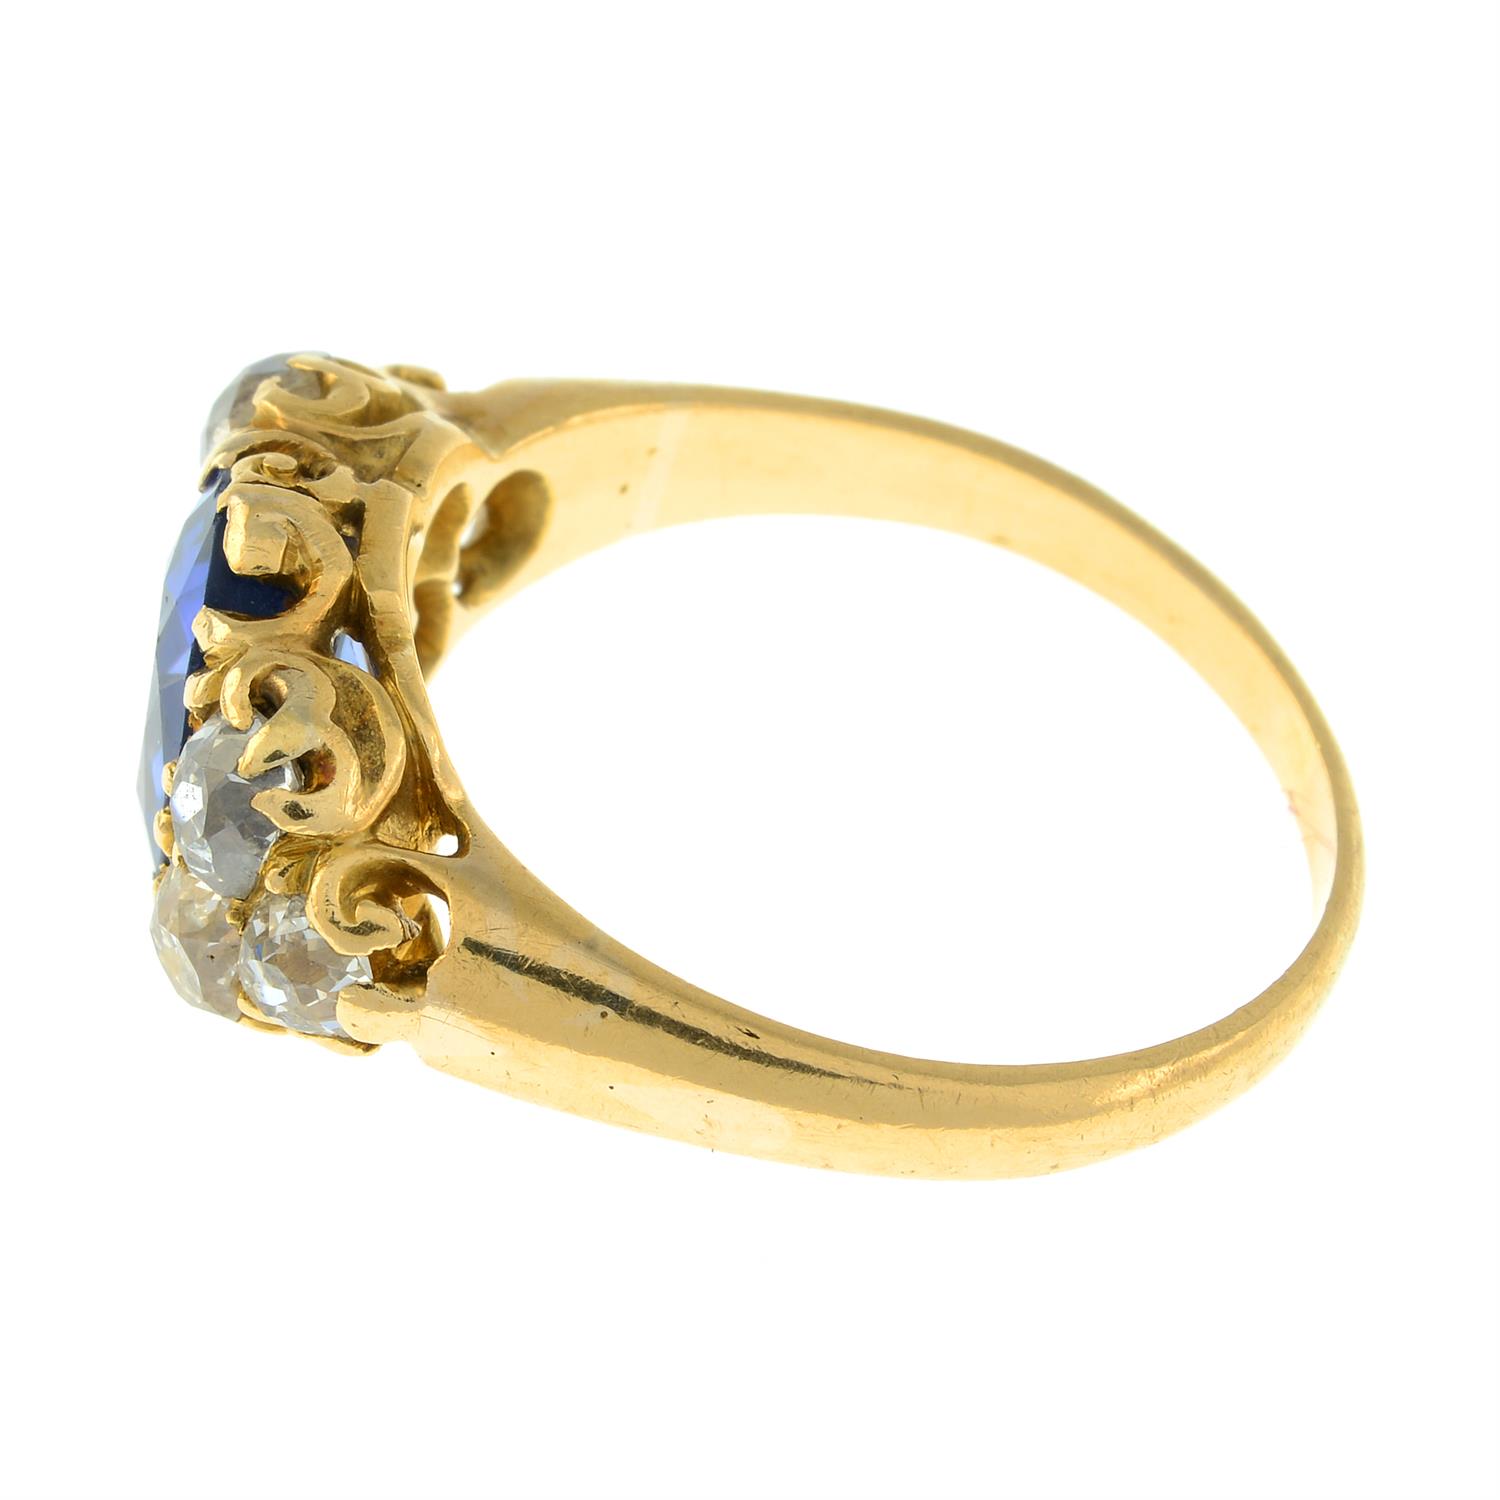 Late Victorian 18ct gold sapphire and diamond ring - Image 4 of 5